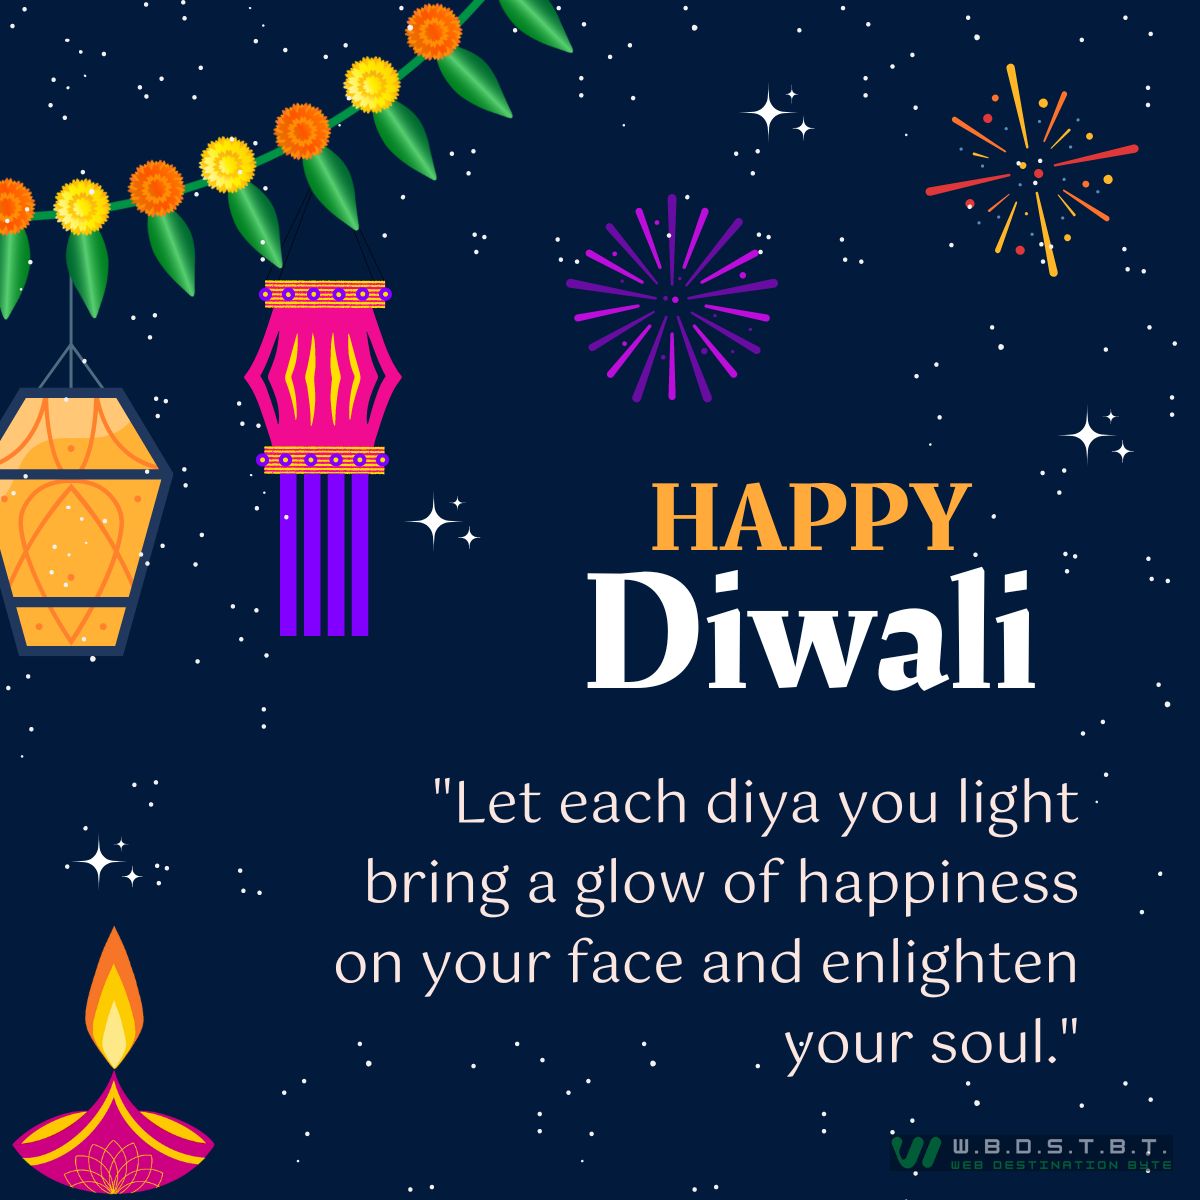 "Let each diya you light bring a glow of happiness on your face and enlighten your soul."